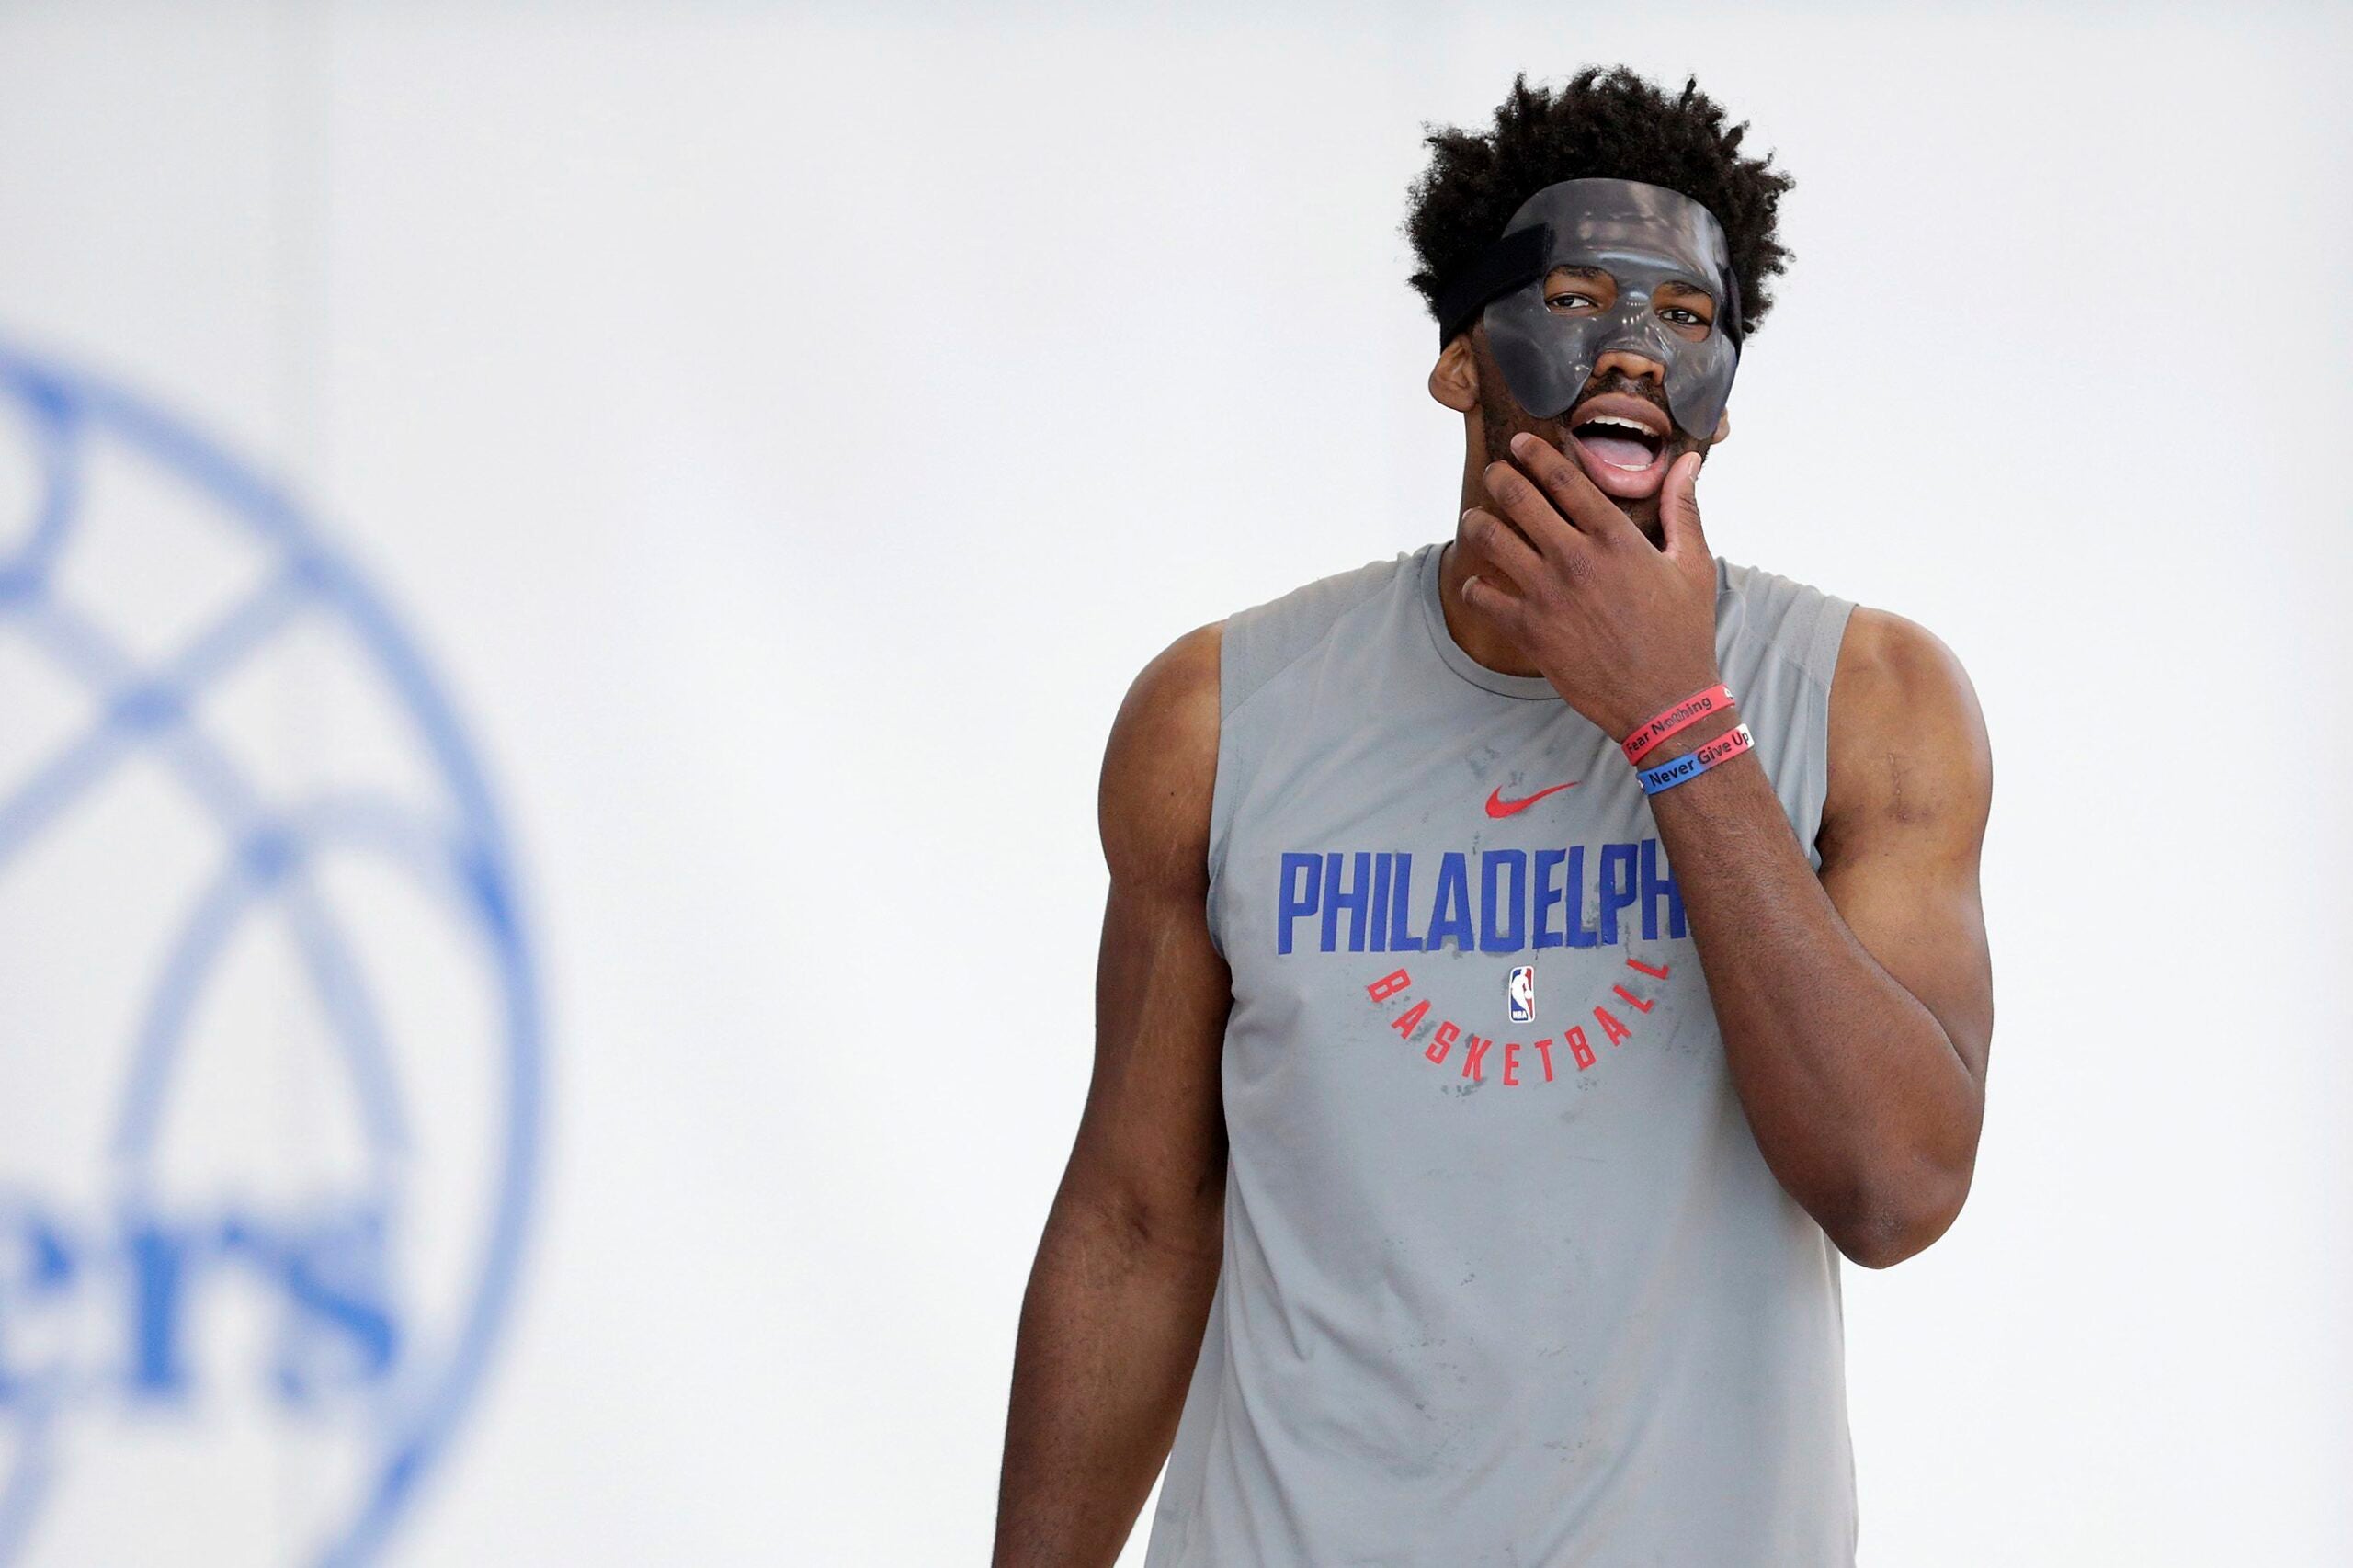 Sixers vs Heat: Joel Embiid's mask has never been made before